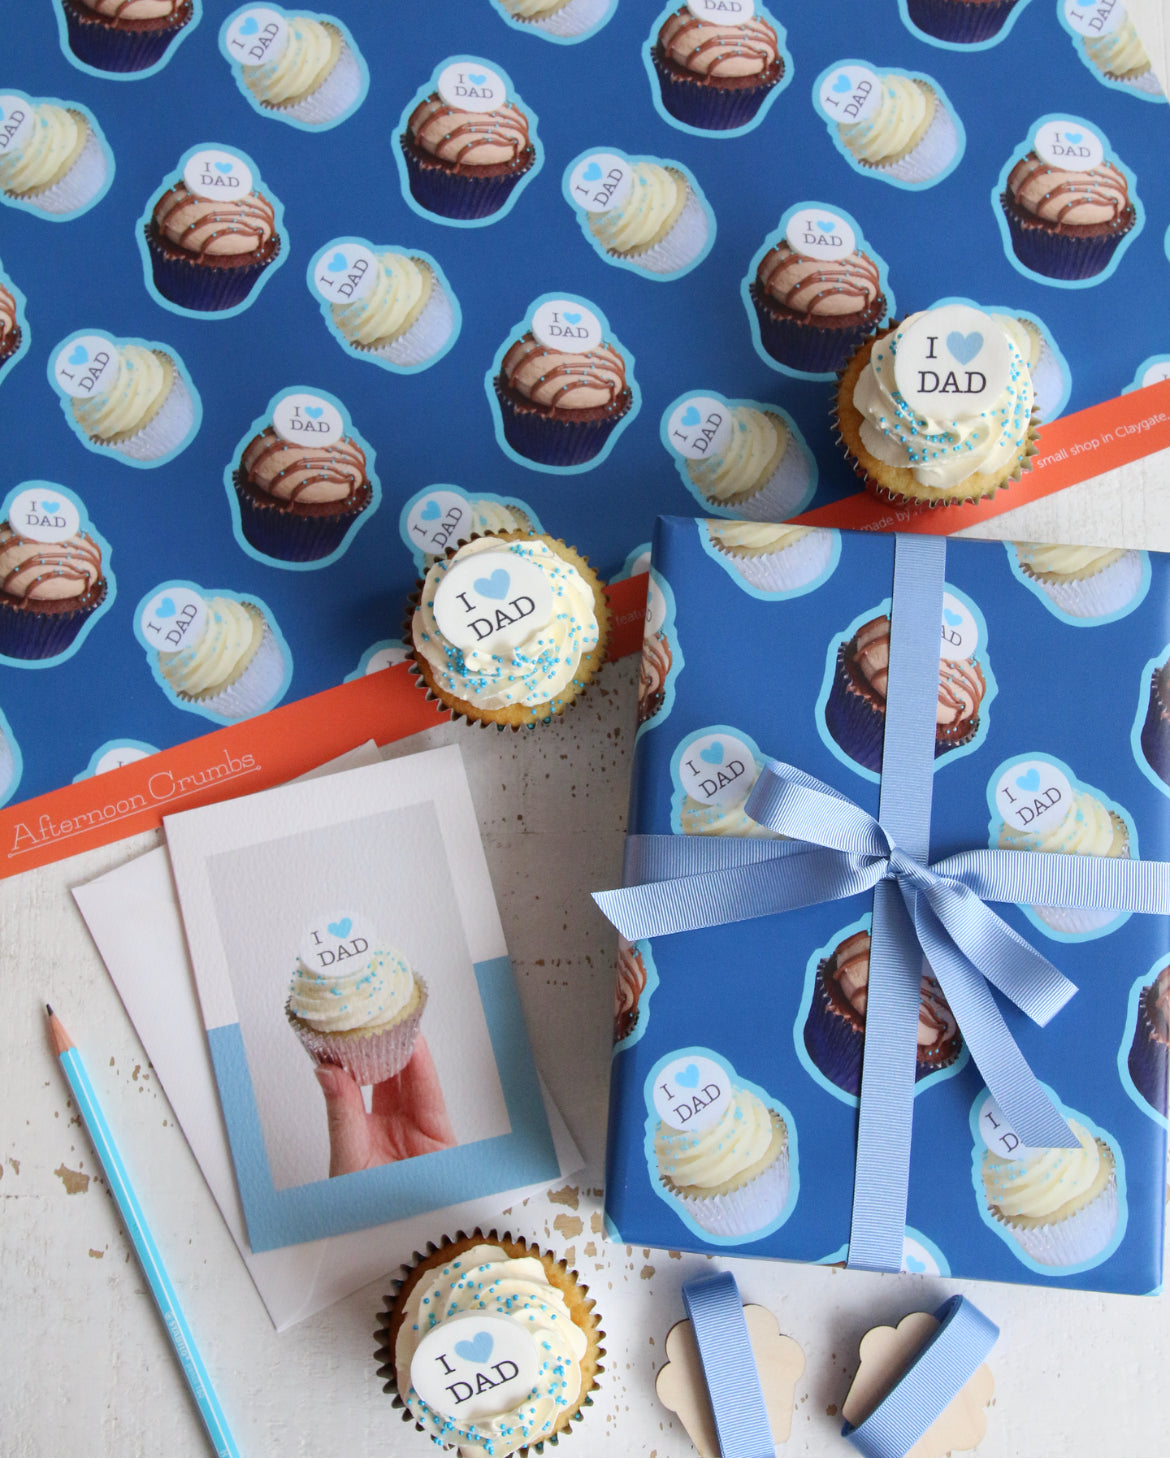 "I Heart Dad" Cupcake Wrapping Paper, Card & Cupcakes on Table